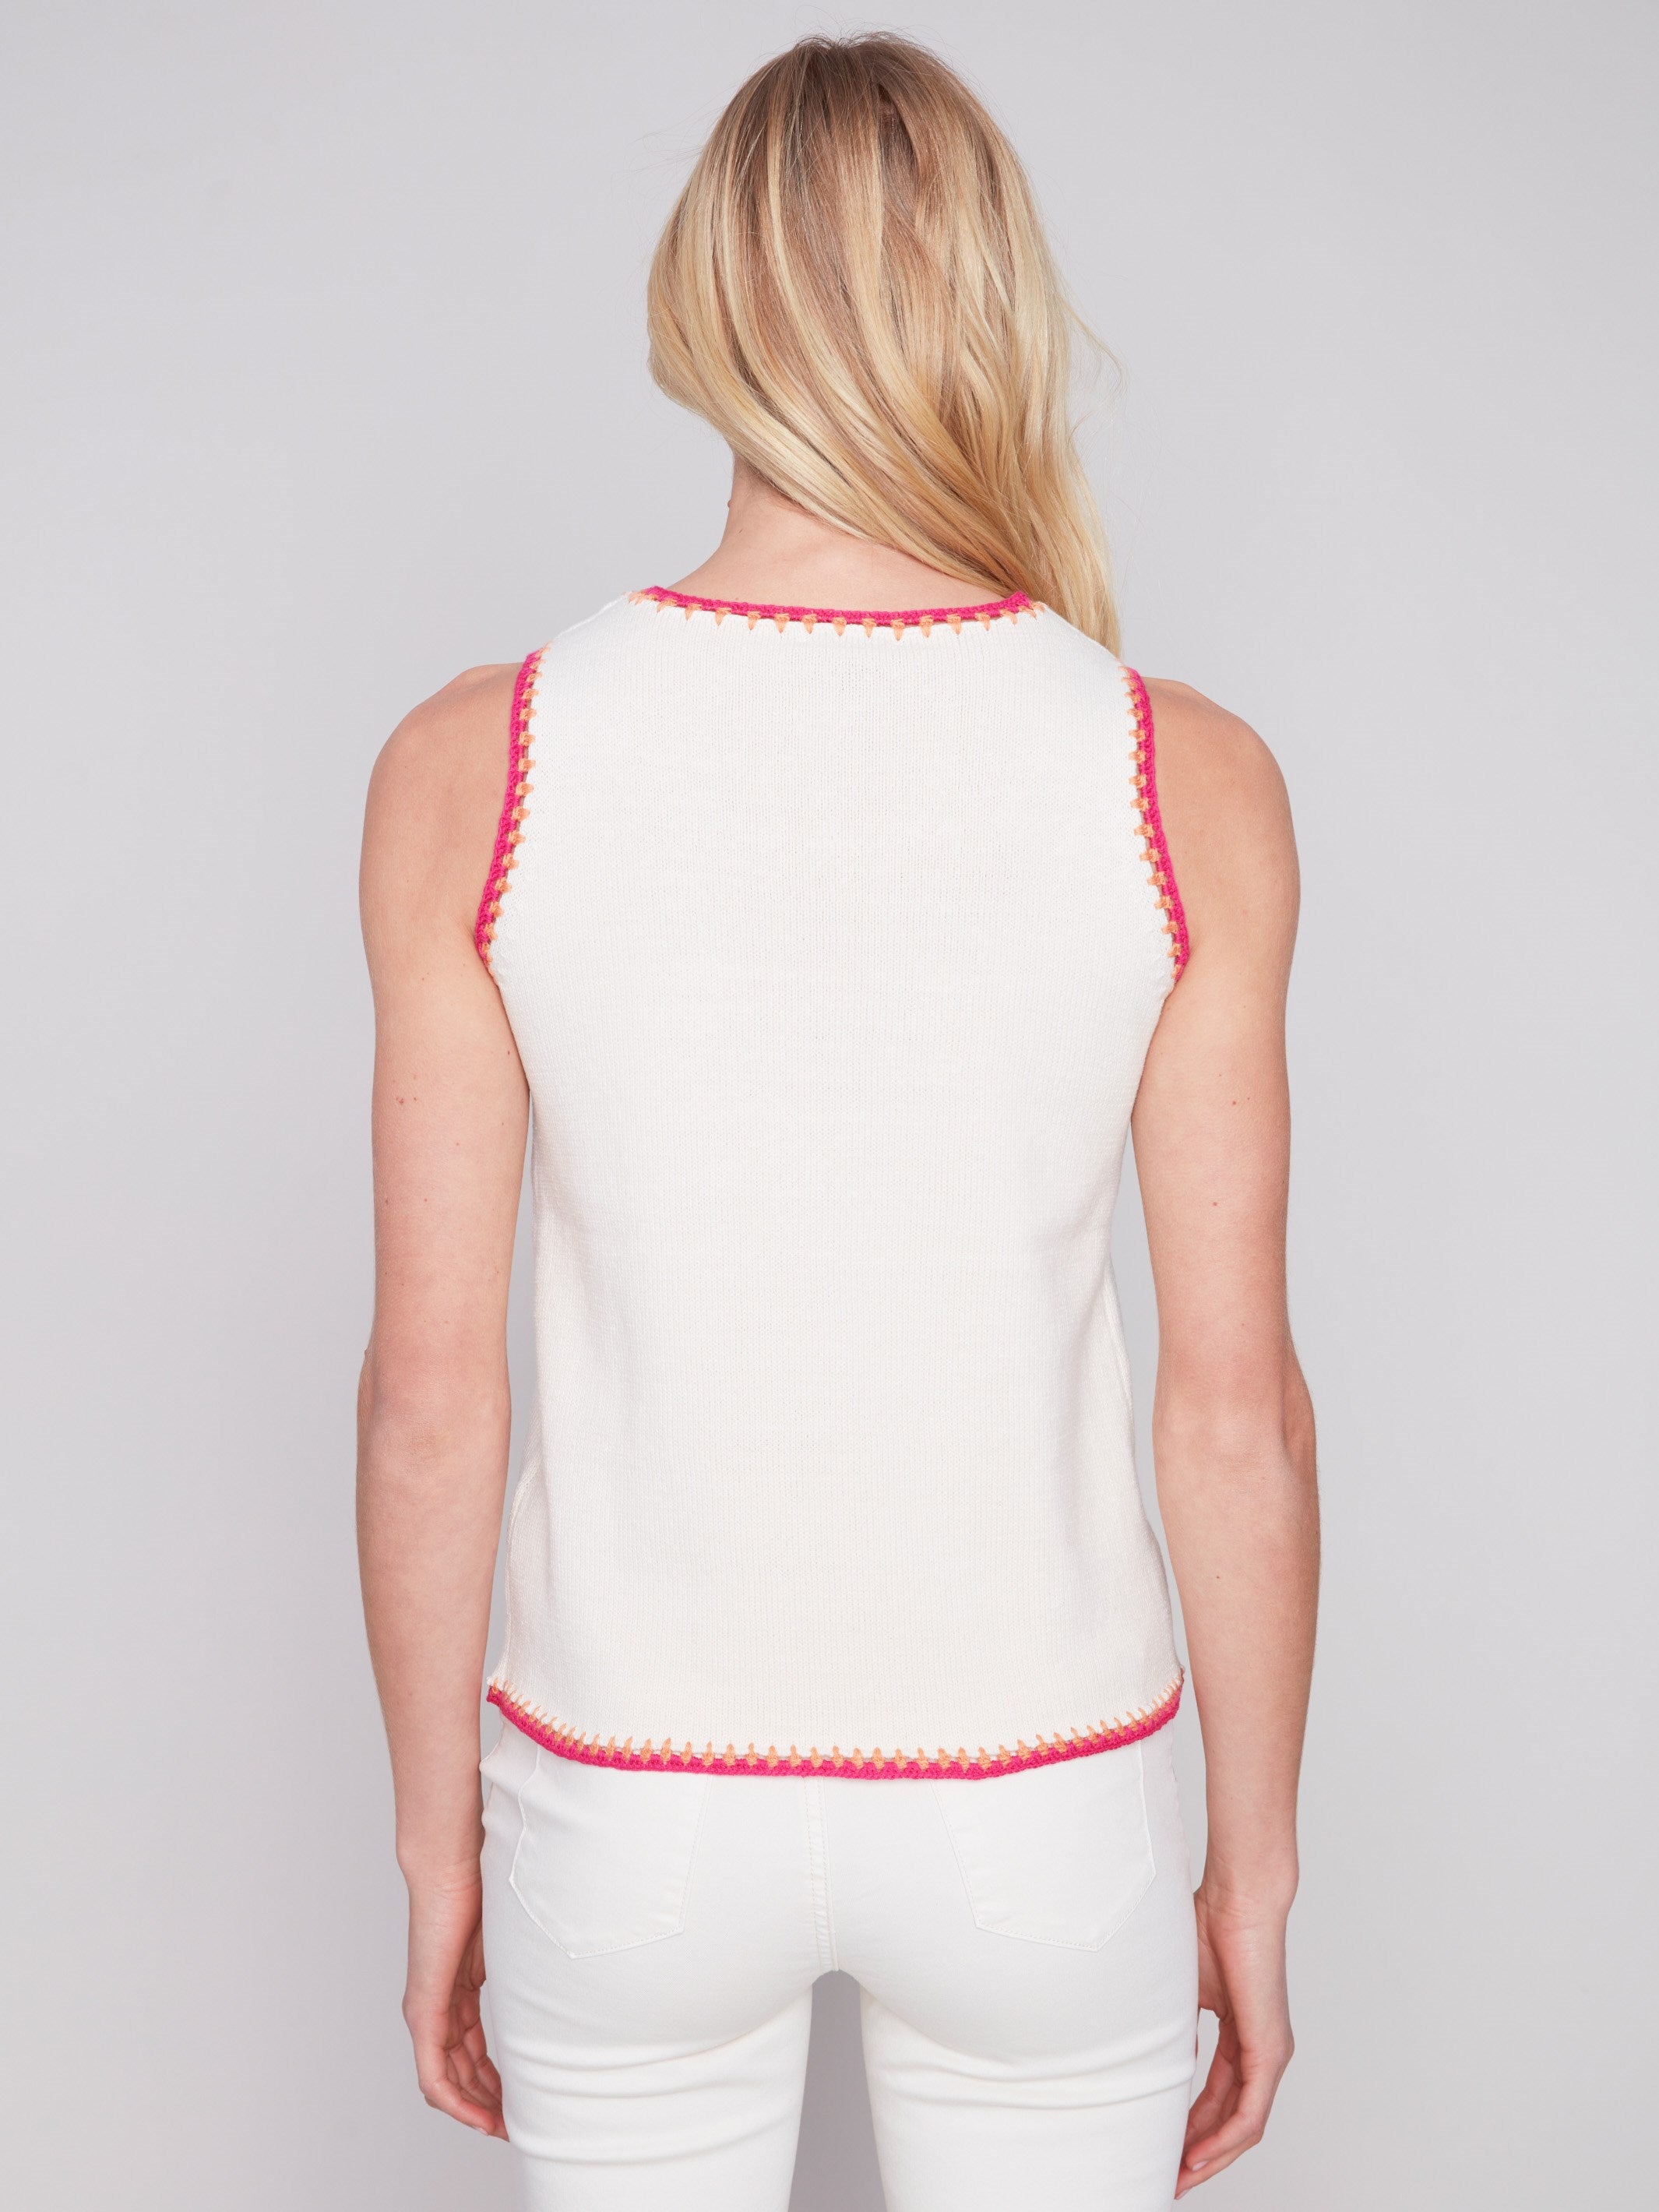 Sleeveless Knit Top with Crochet Detail - Natural - Charlie B Collection Canada - Image 2